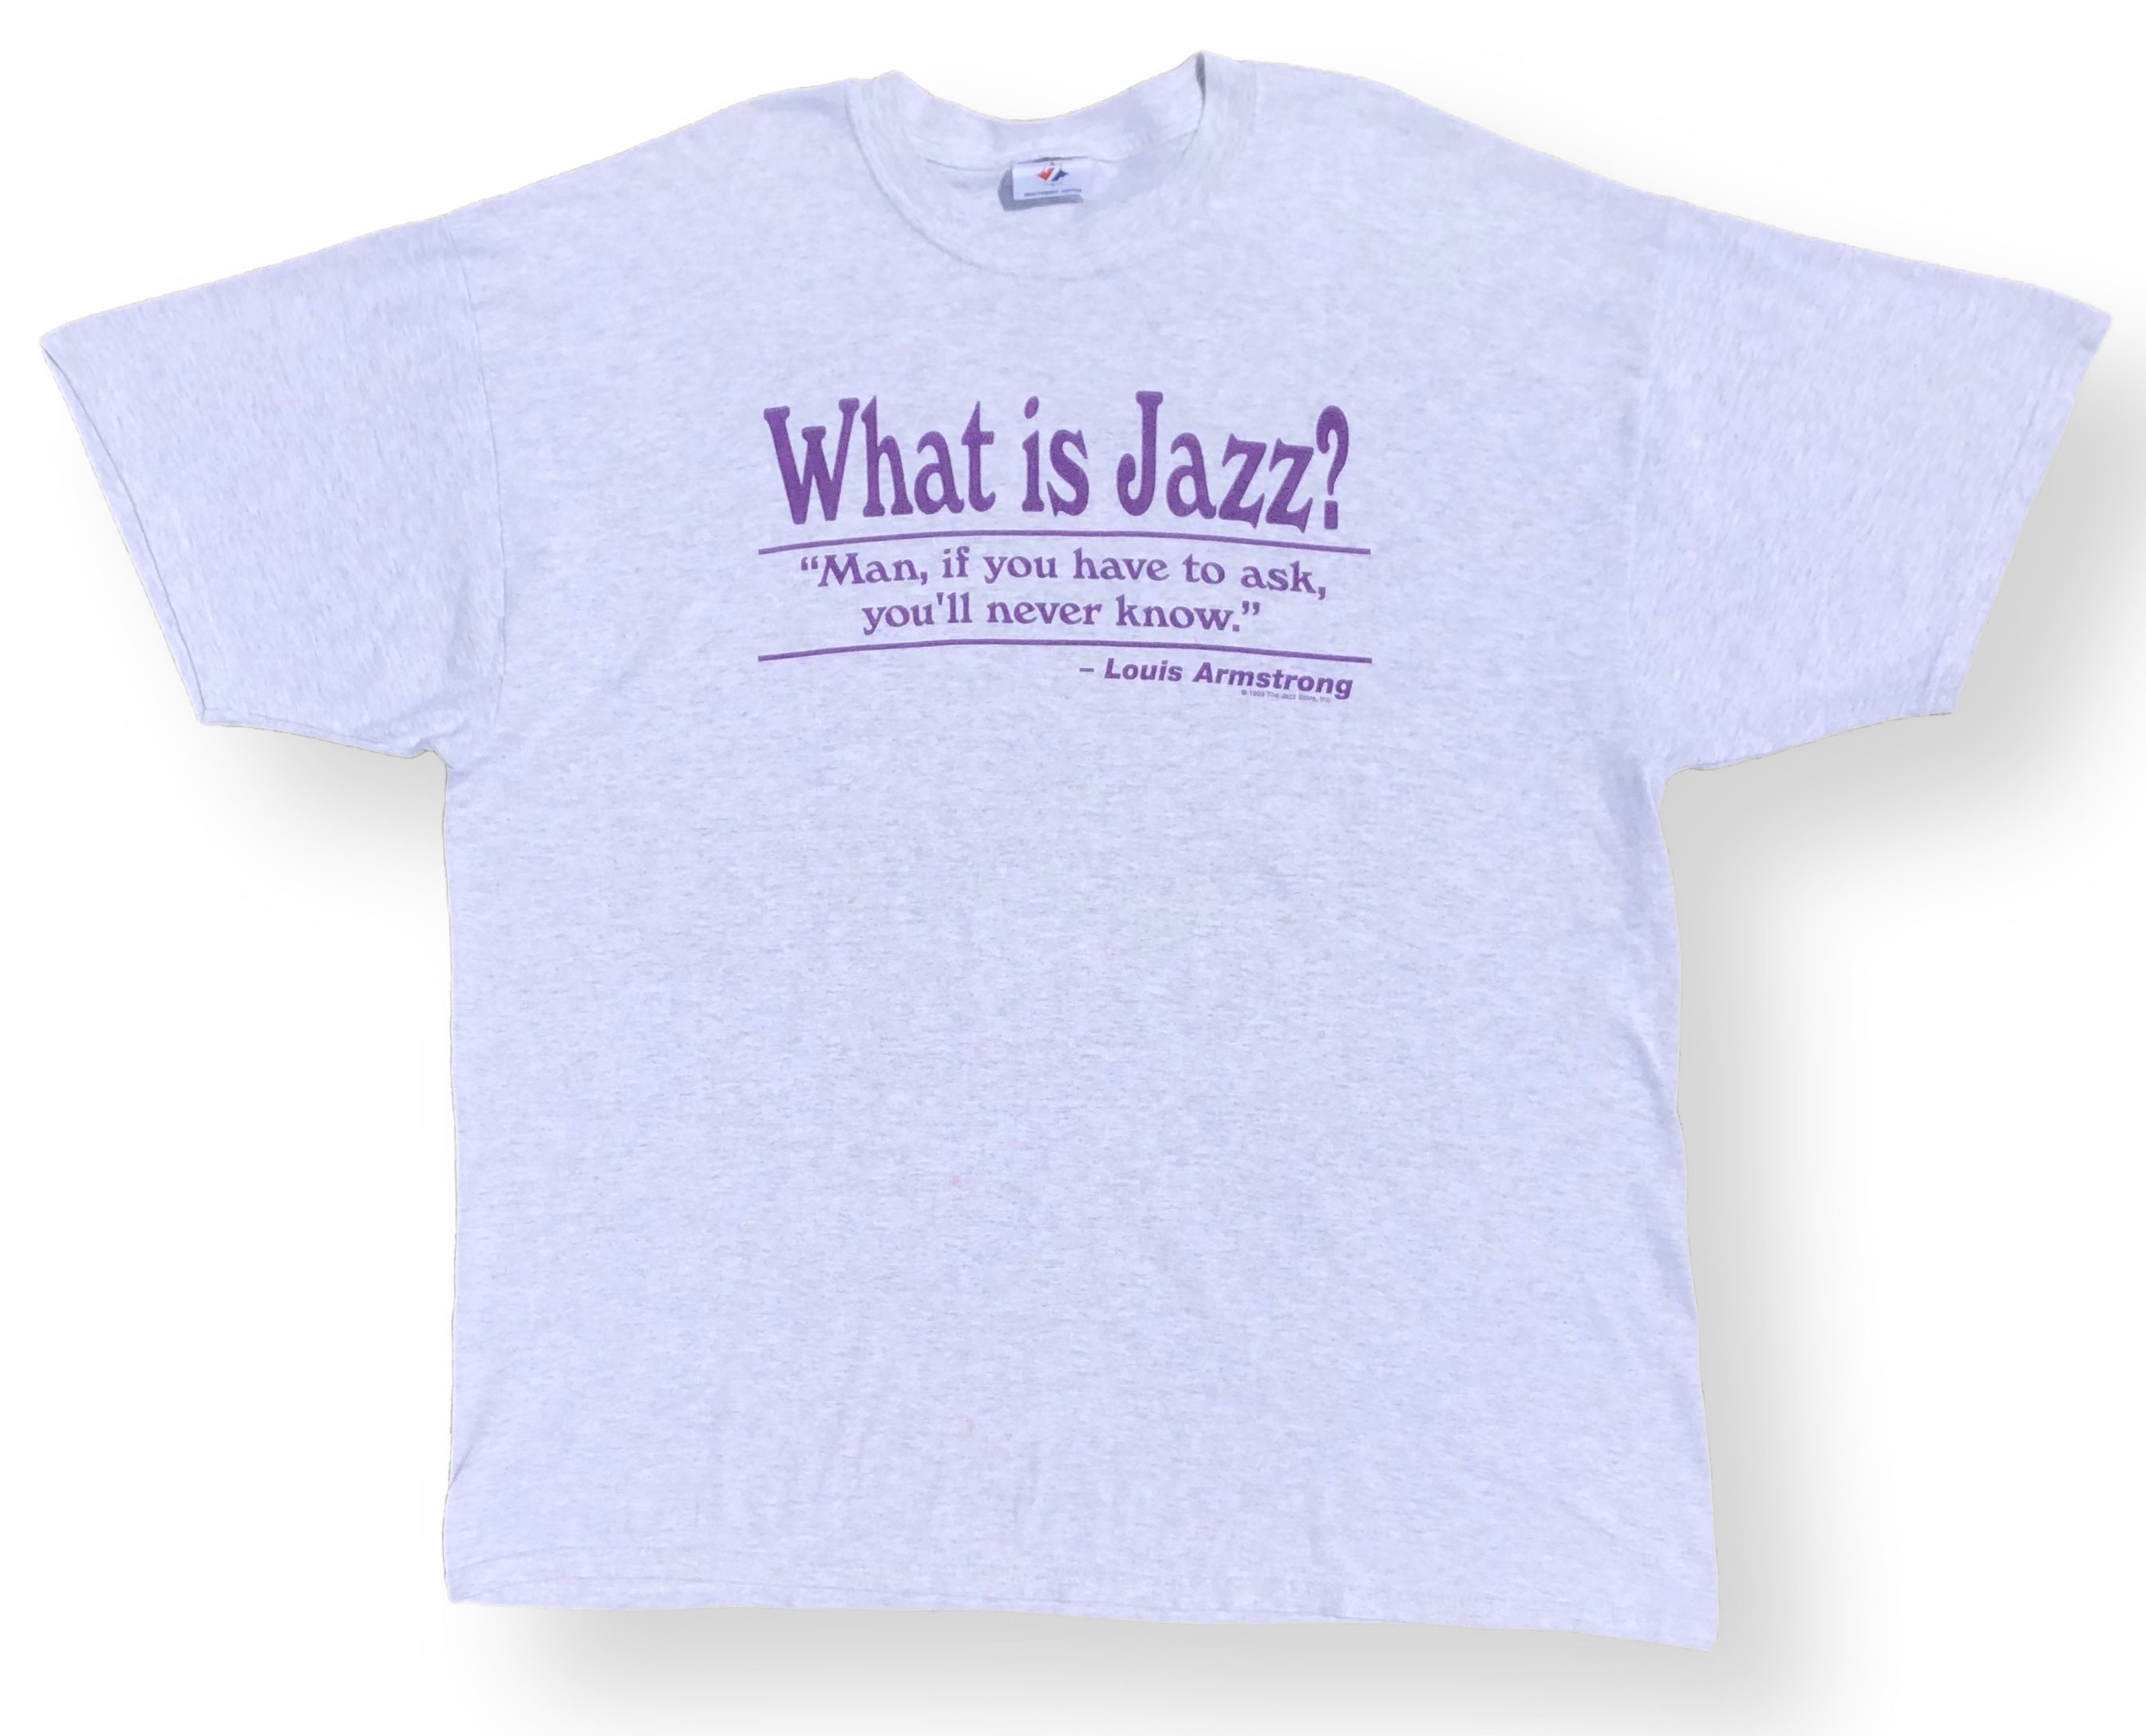 I Was Telling My Son About Louis Armstrong And He Said His Website T-Shirt  Active T-Shirt for Sale by beerleo in 2023